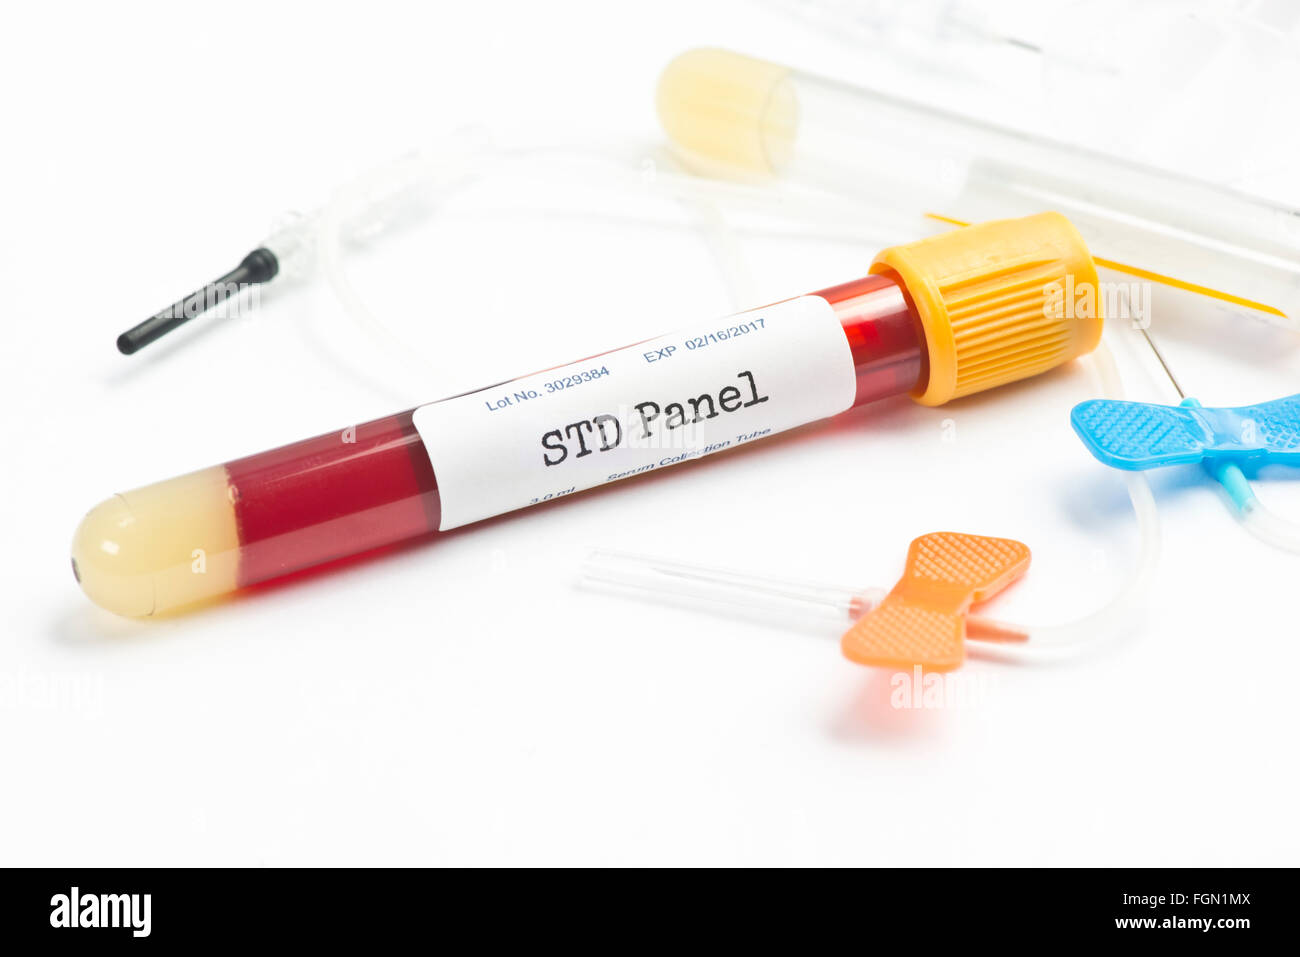 STD blood analysis collection tube with virology lab request.  Labels and document are fictitious and created by the photographe Stock Photo